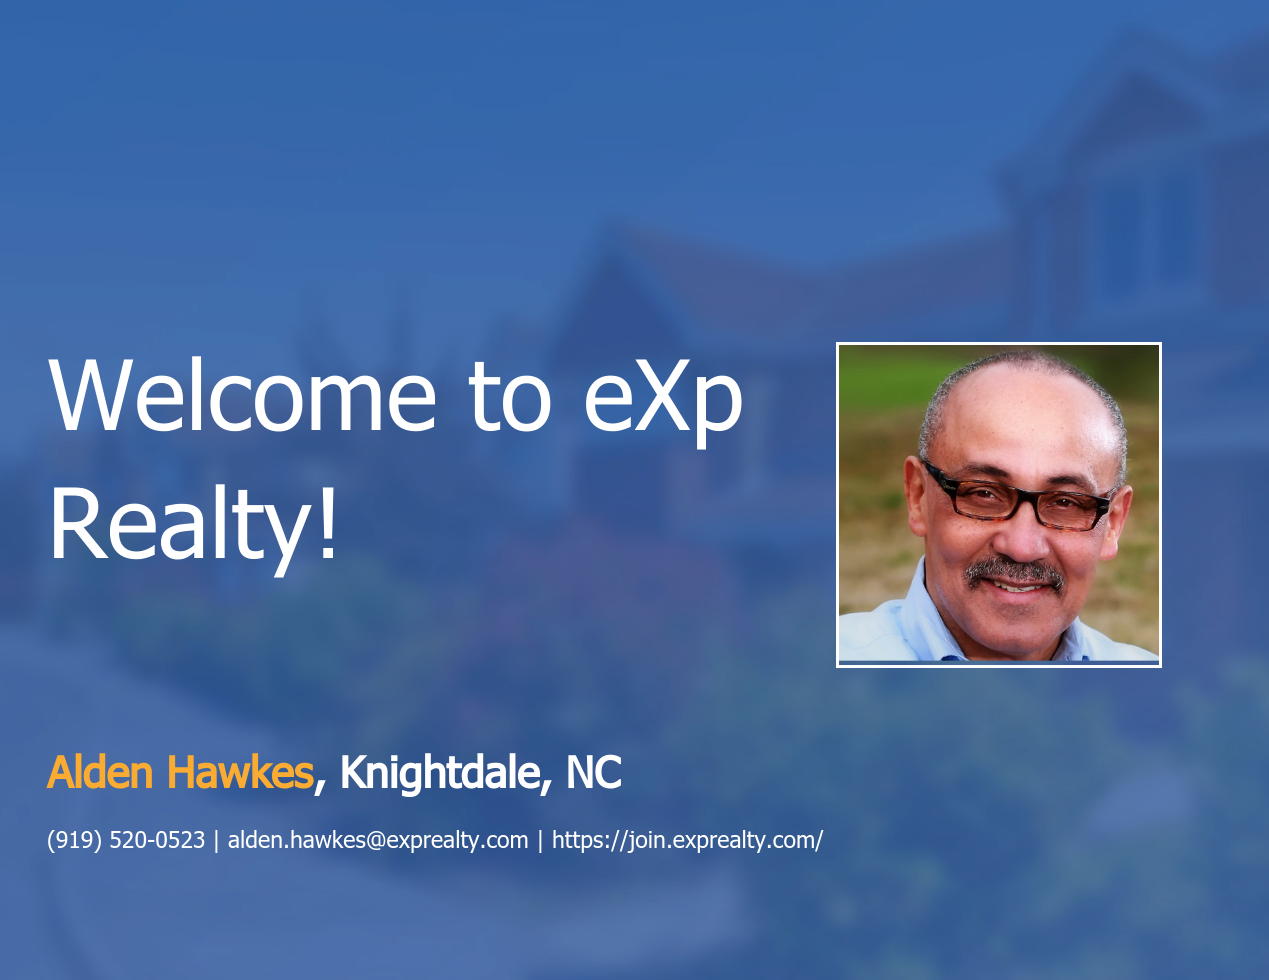 Welcome to eXp Realty Alden Hawkes!